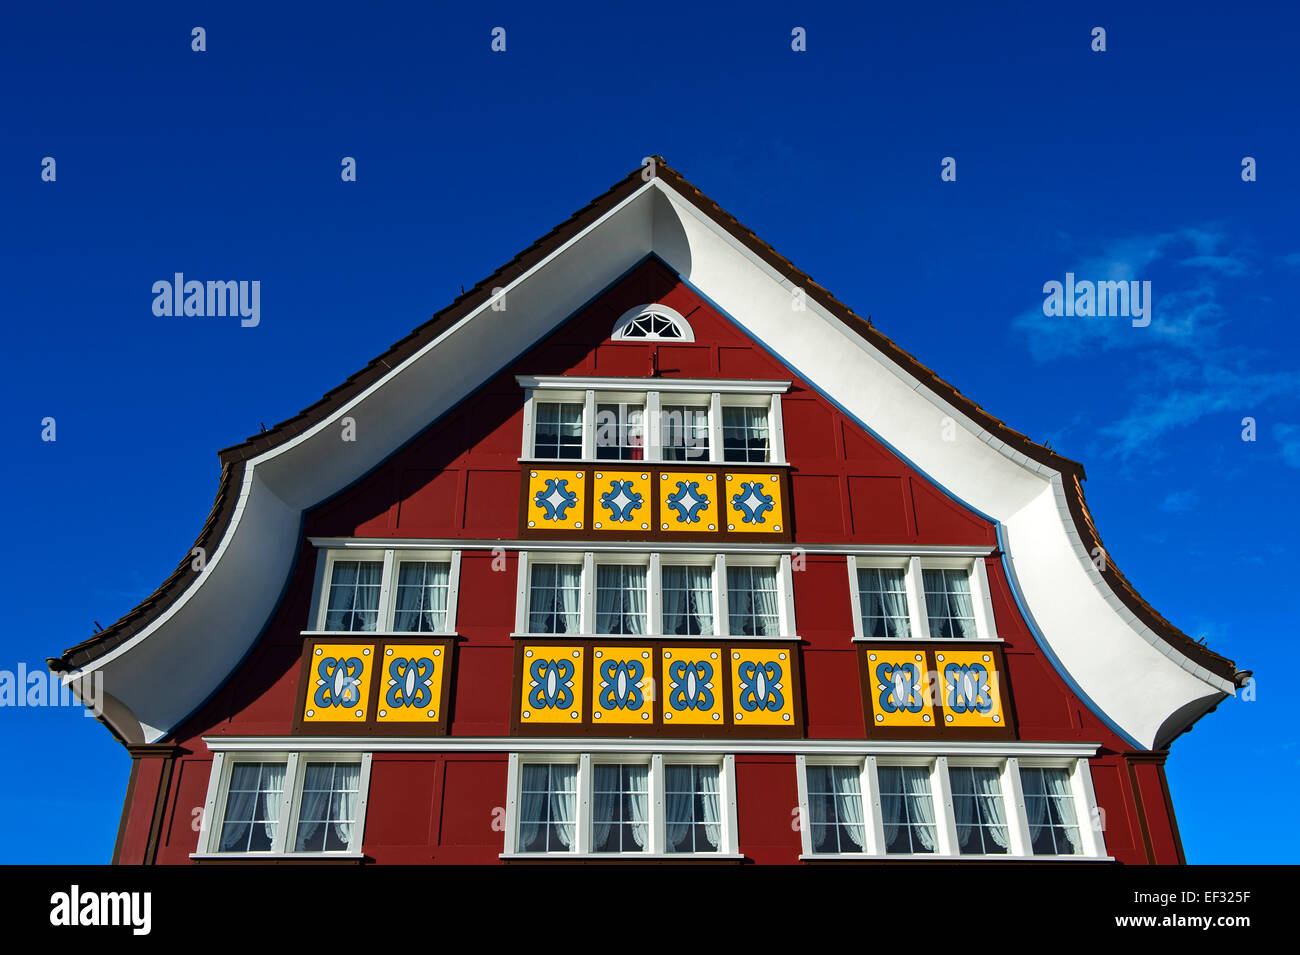 Facade of a residential building with curved gable, Appenzell style, Appenzell, Canton Appenzell, Switzerland Stock Photo